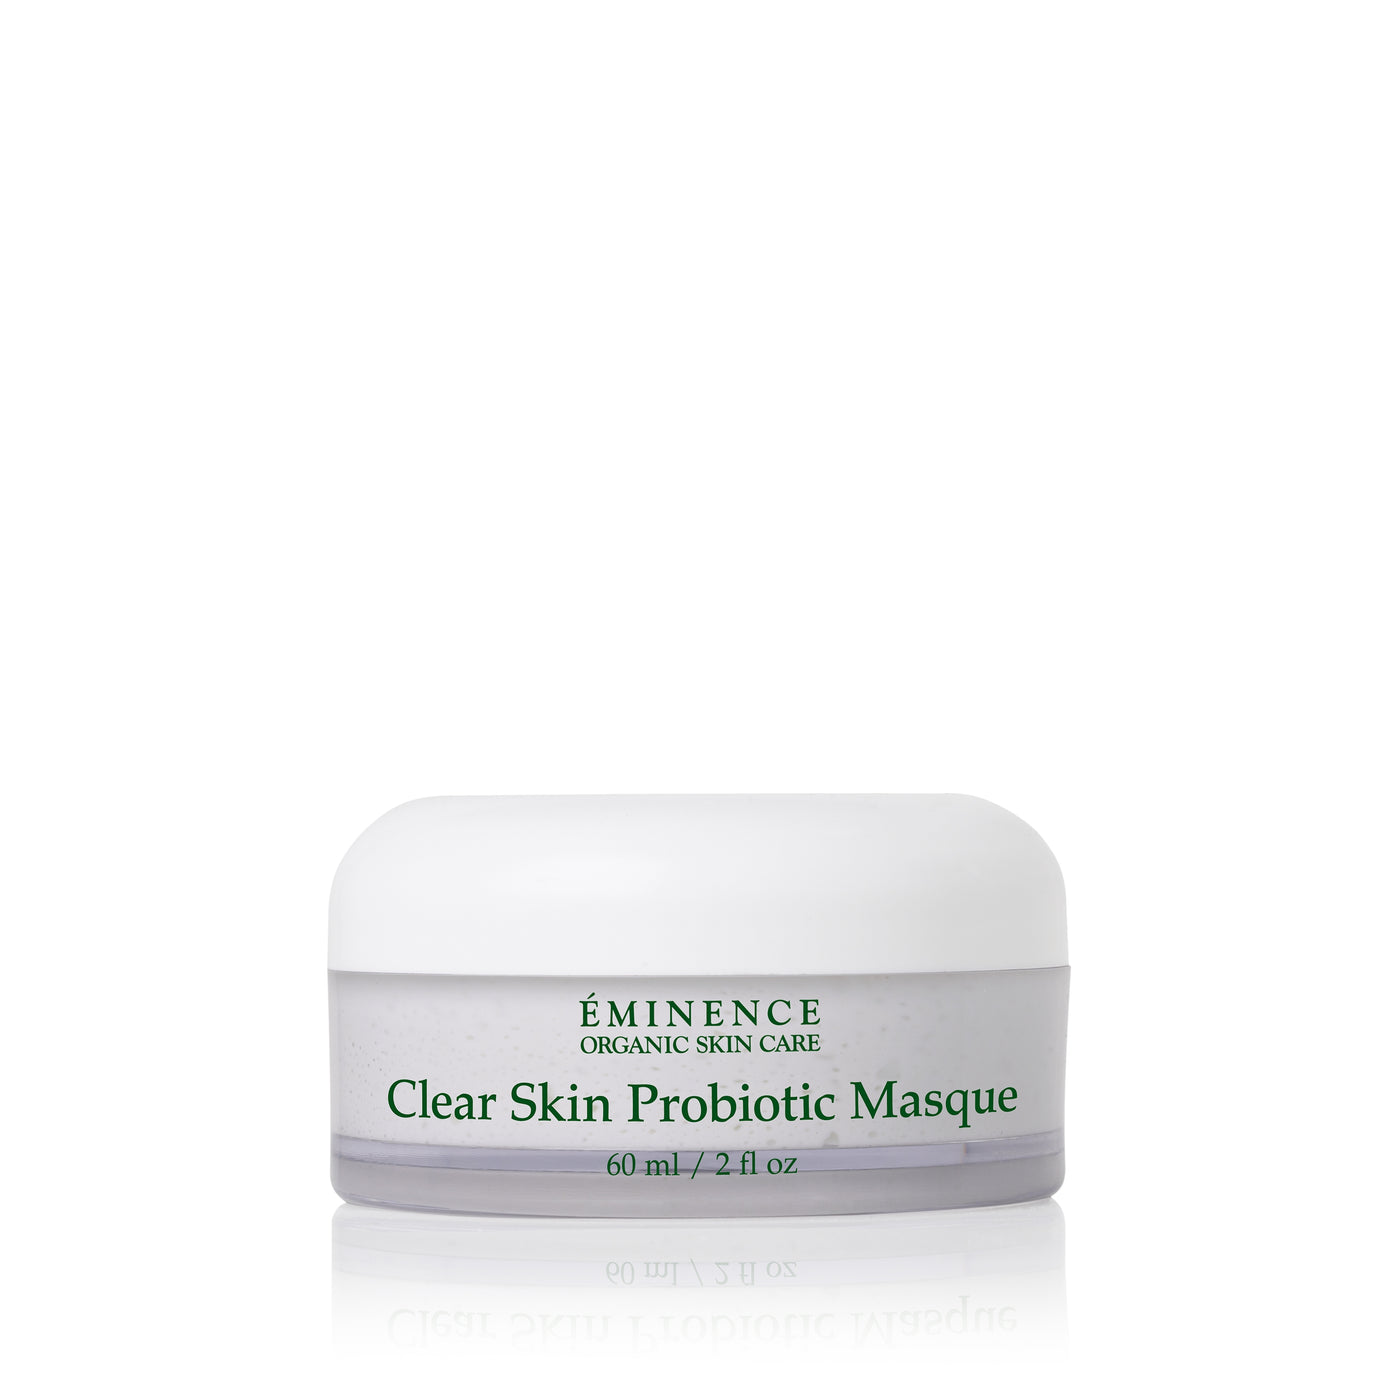 Eminence Organics Clear Skin Probiotic Masque - Radiance Clean Beauty